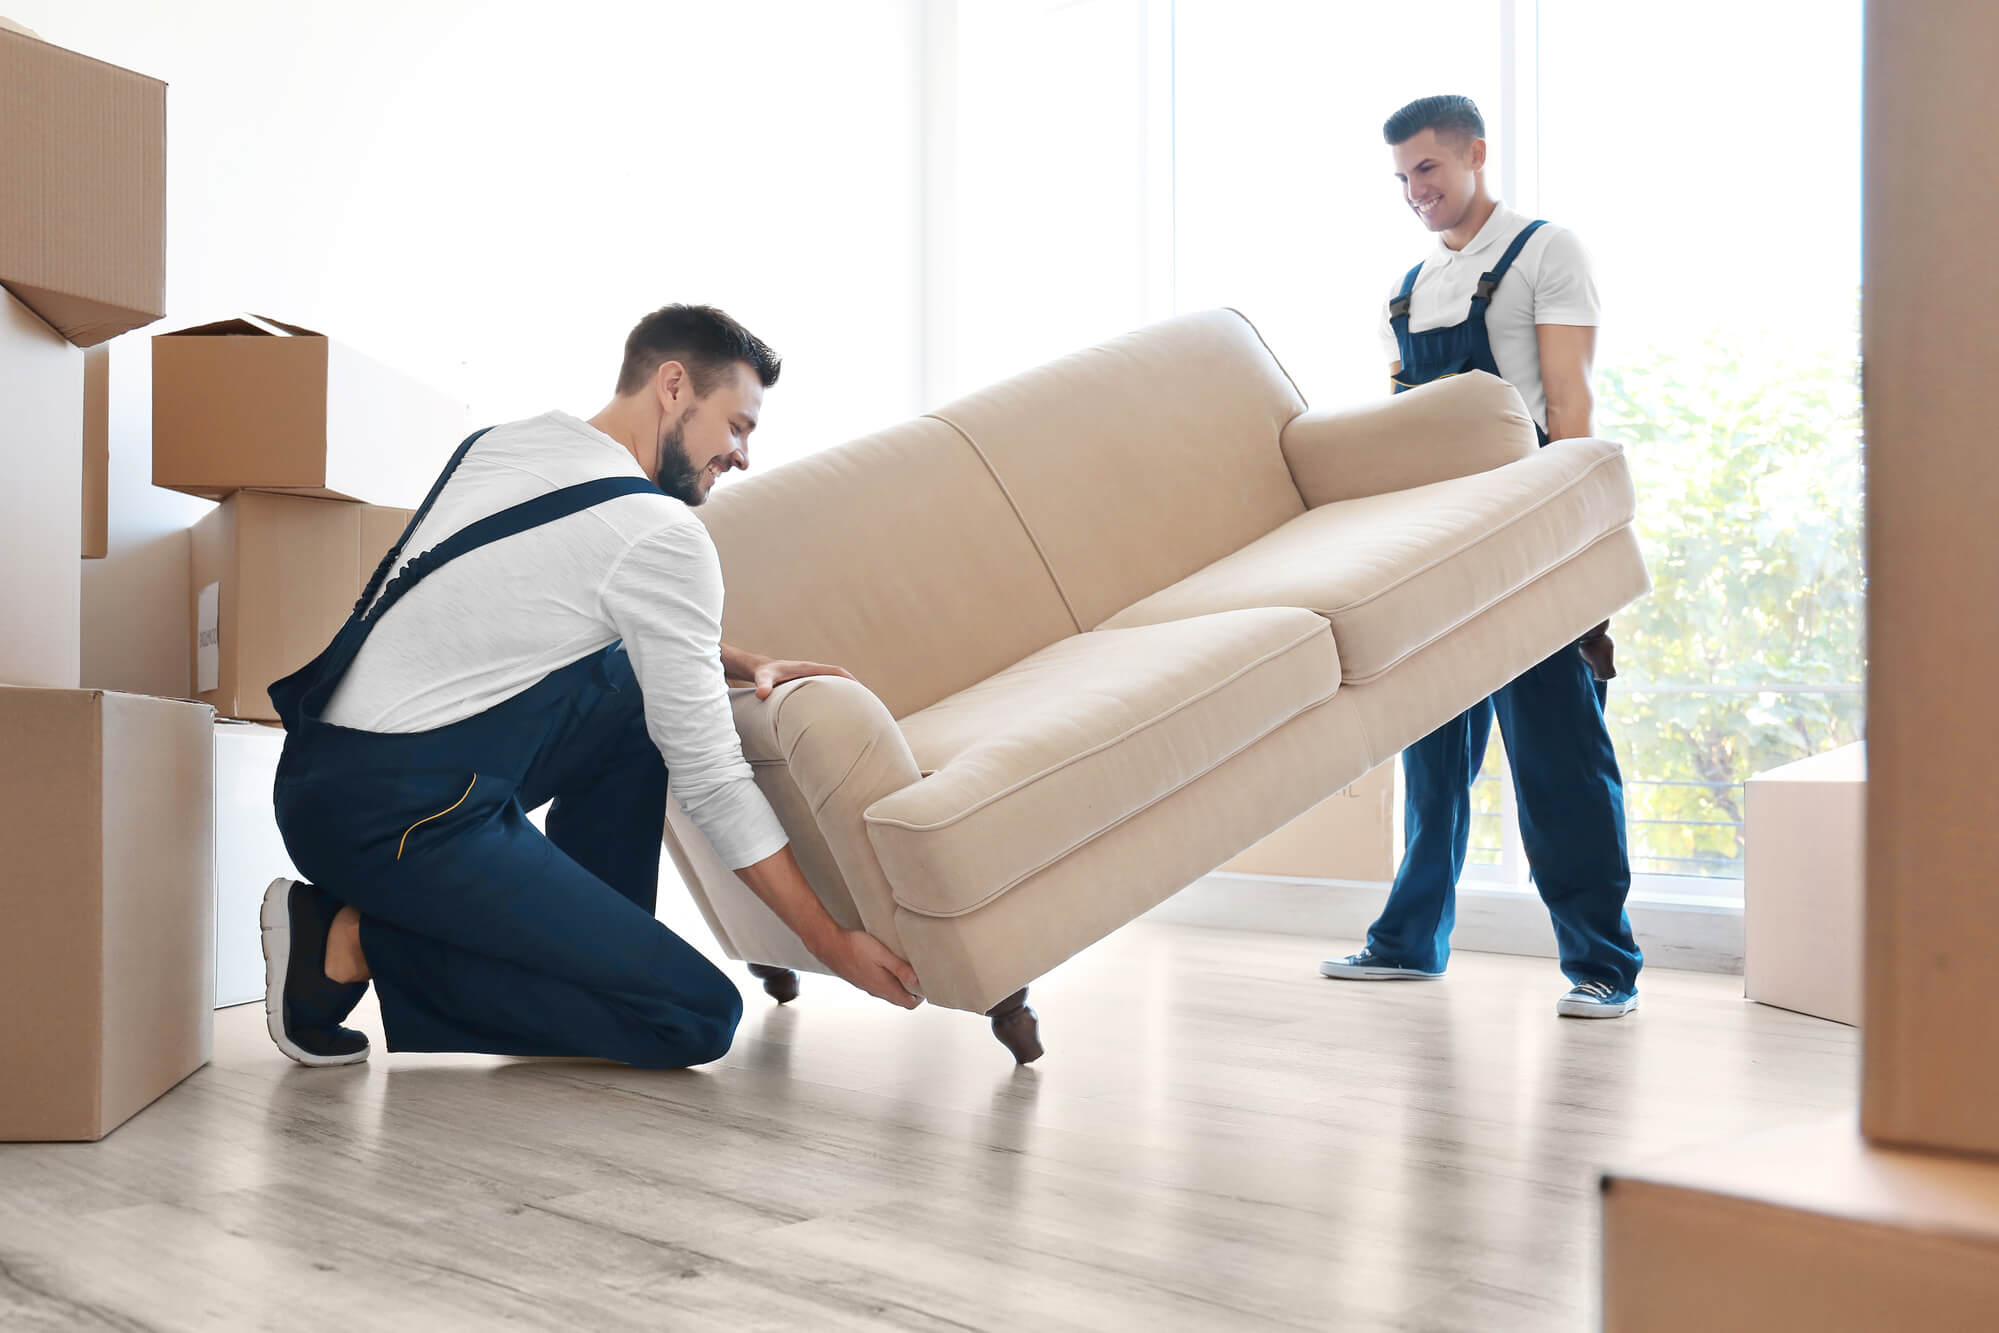 local moving company in west palm beach placing furniture